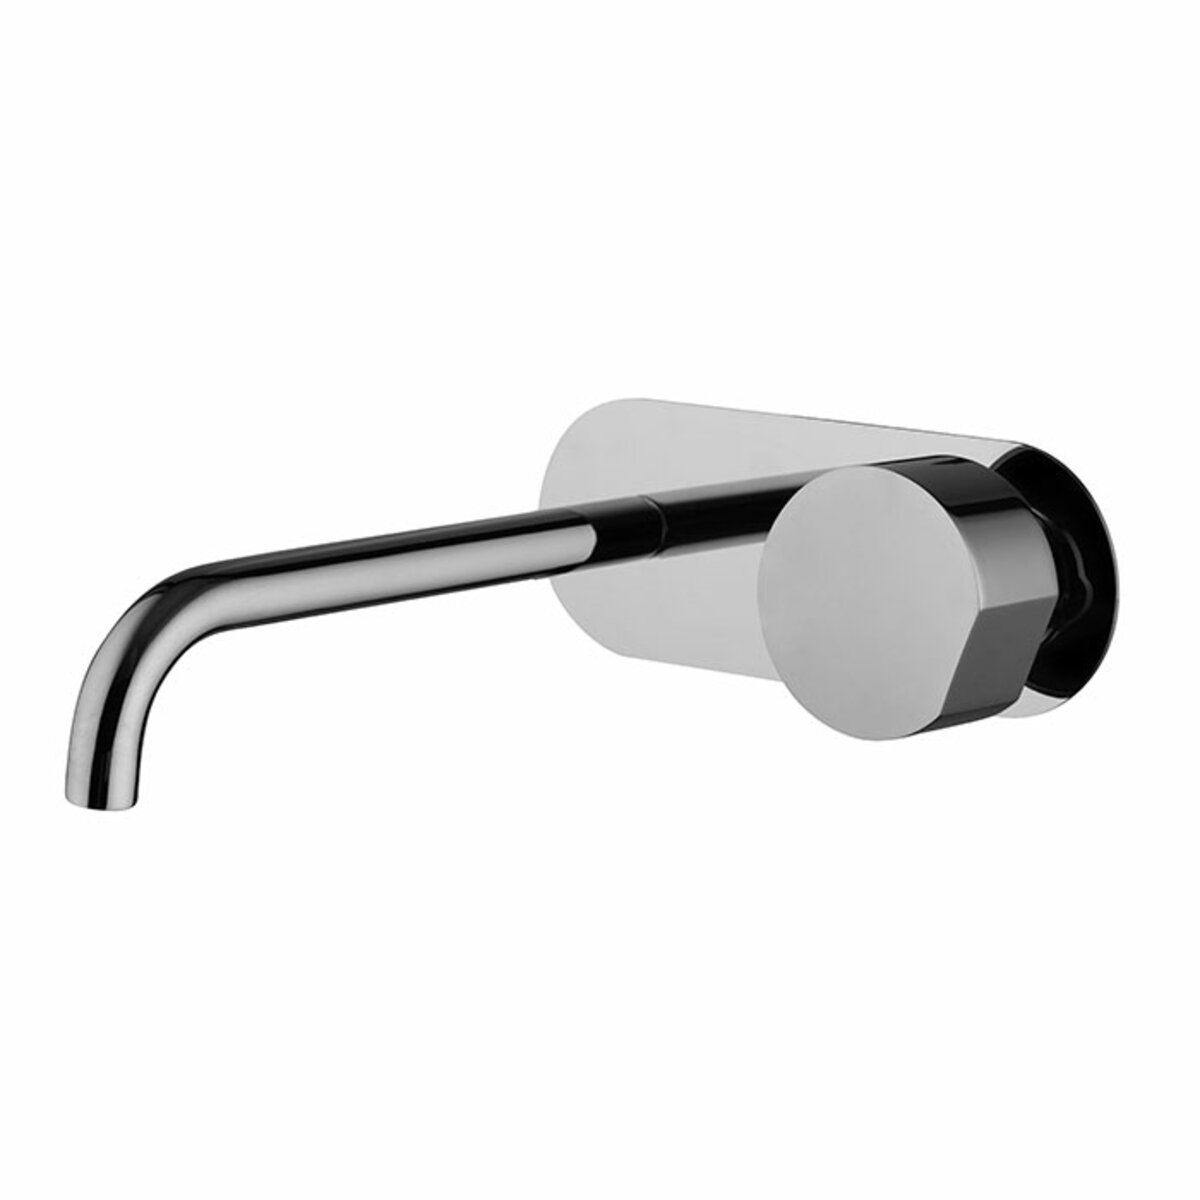 S2 handle for Fima Carlo Frattini mixer So brushed nickel